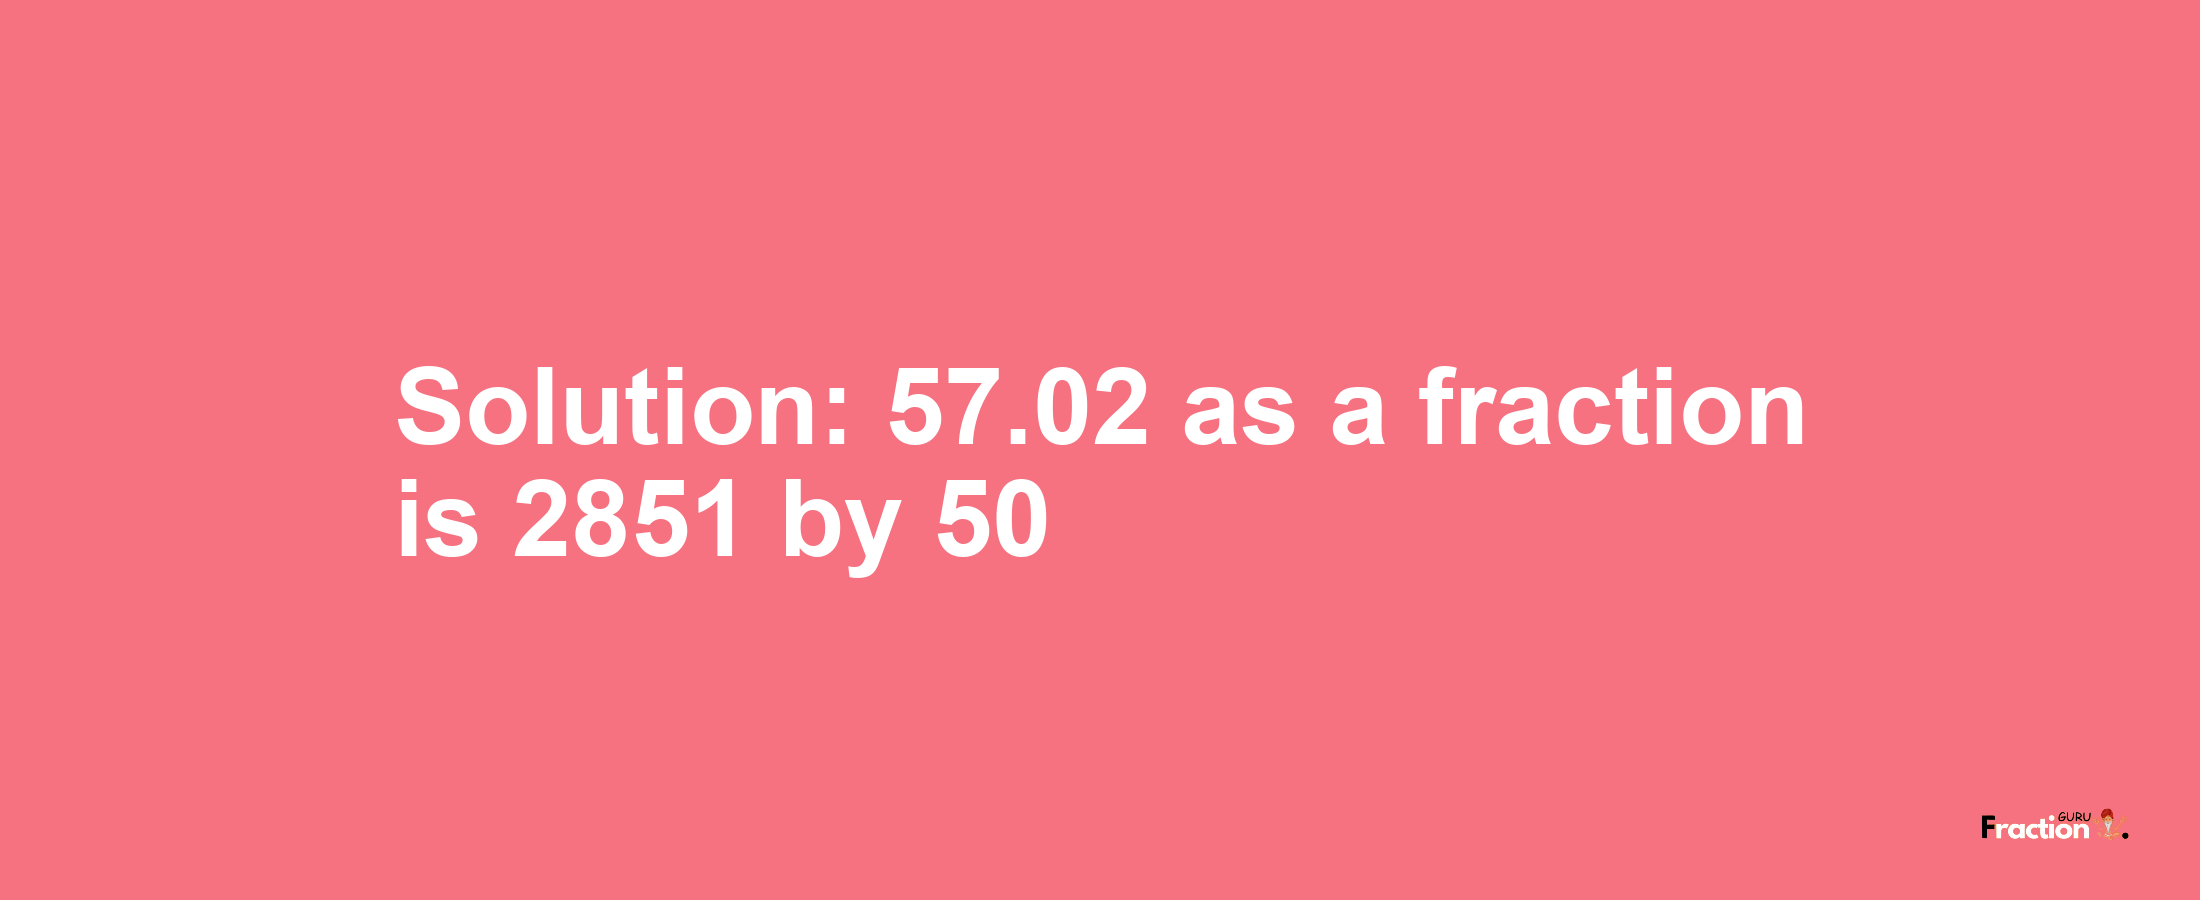 Solution:57.02 as a fraction is 2851/50